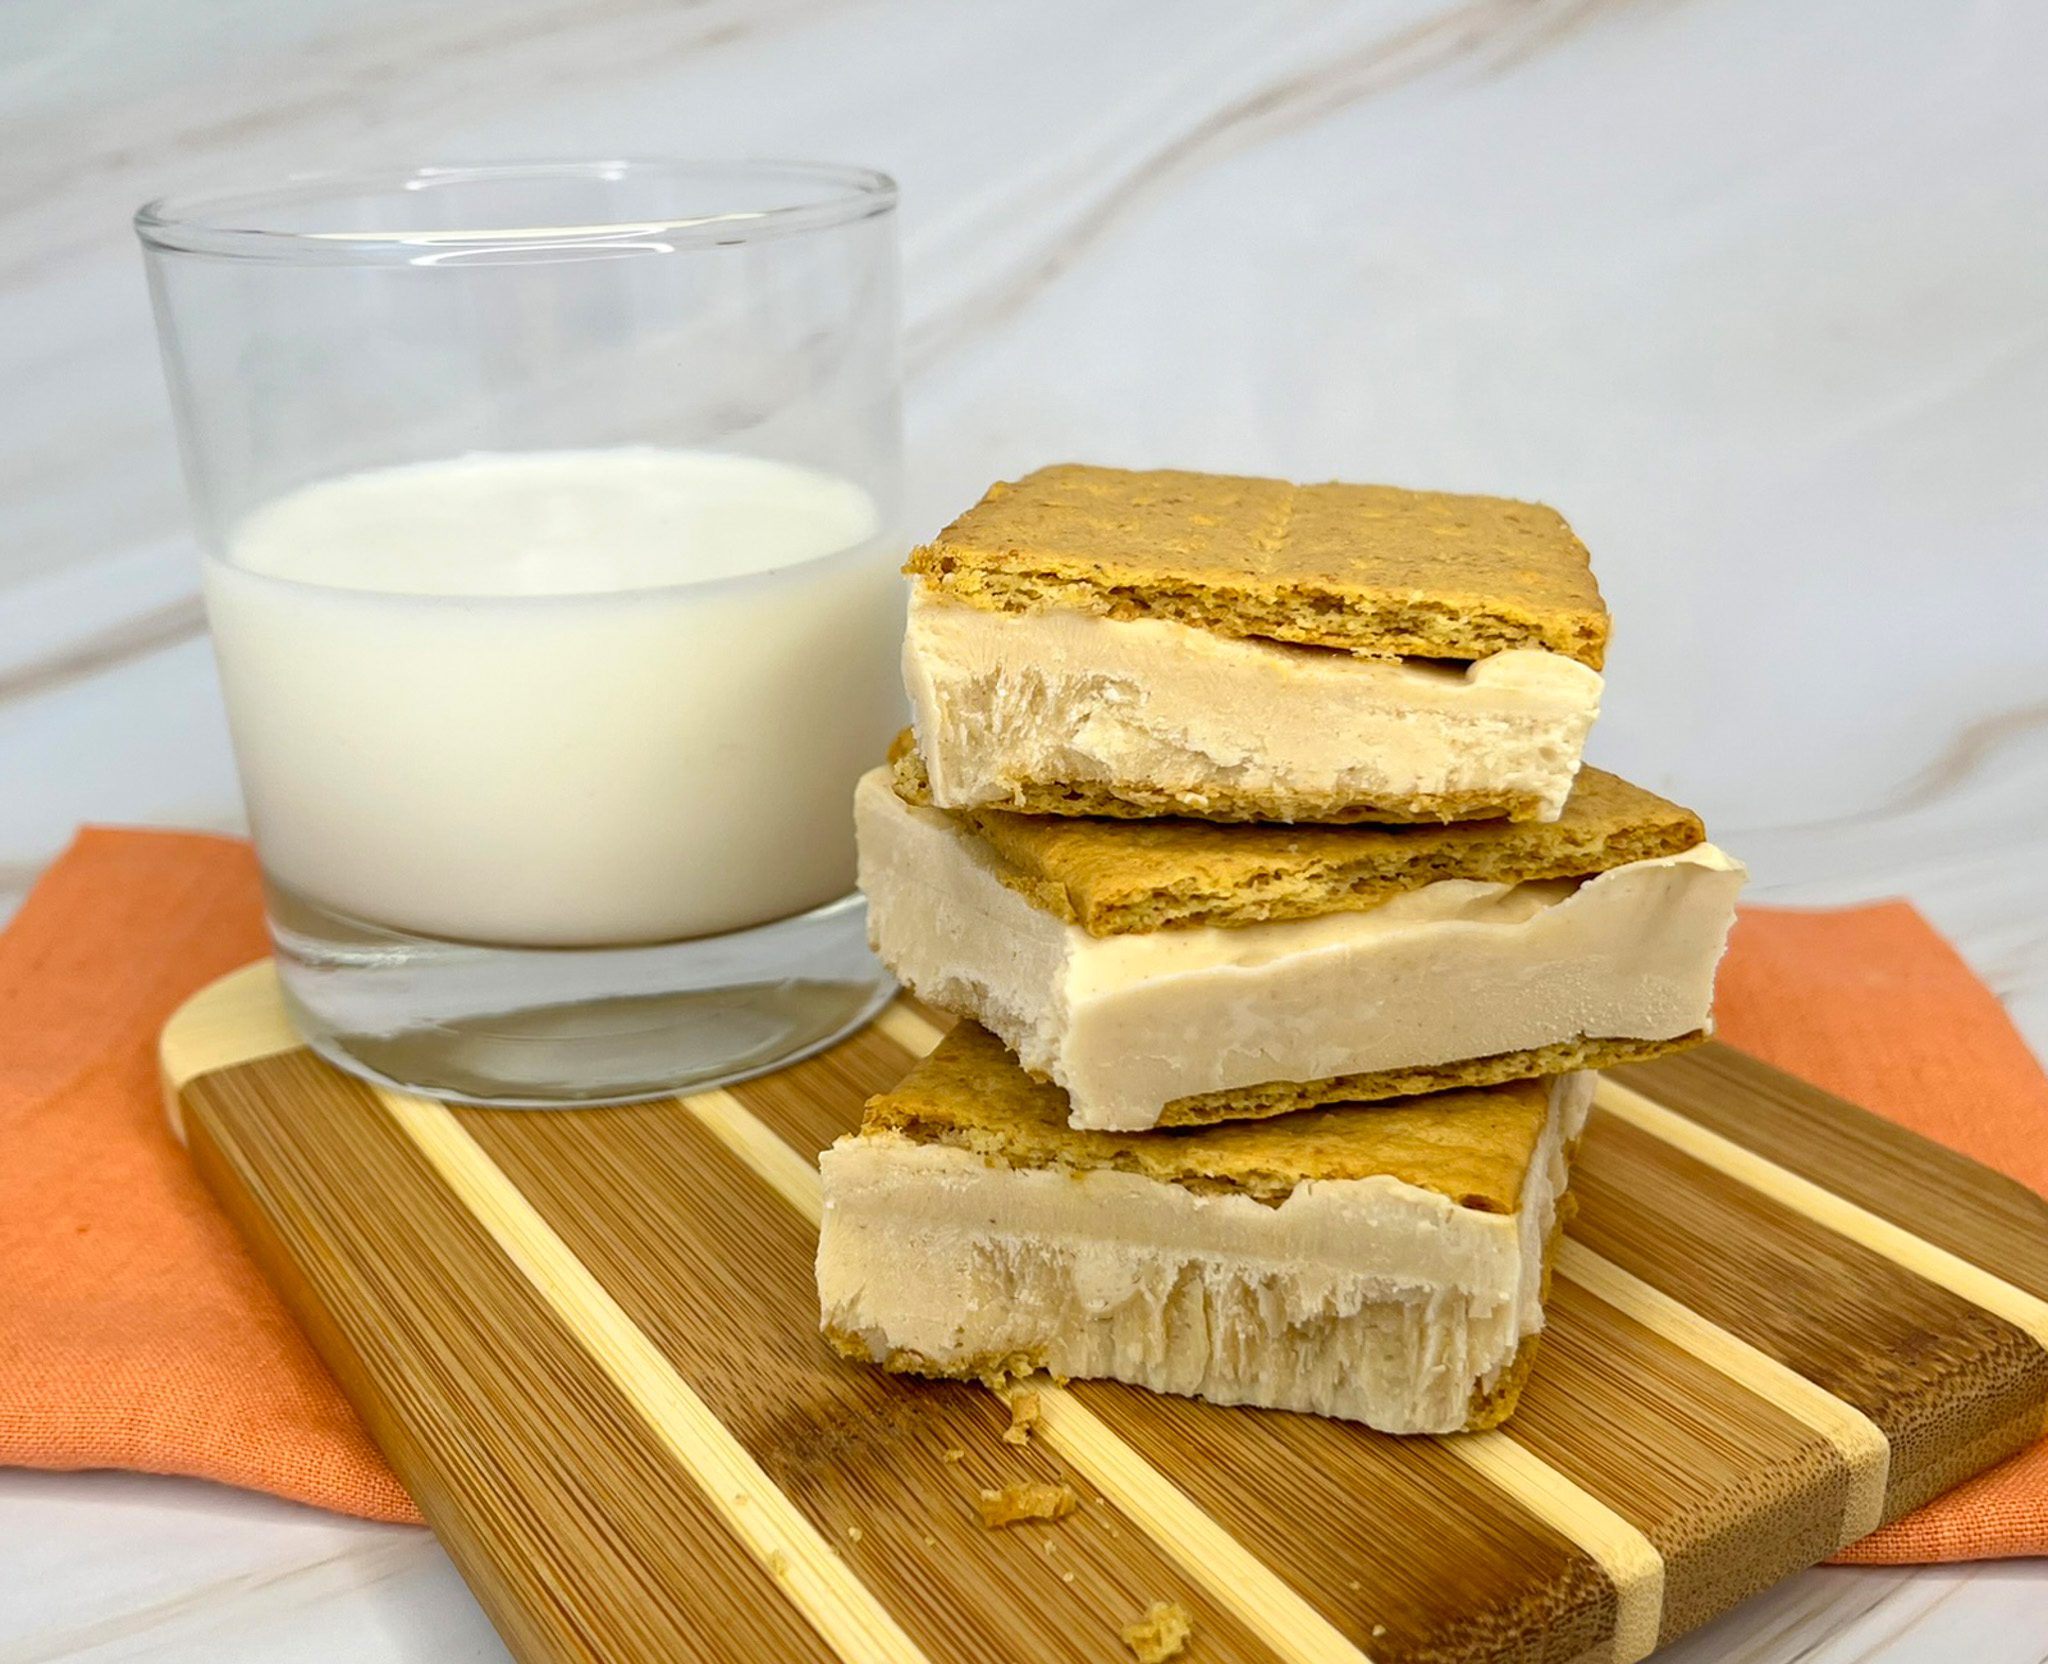 Thumbnail image for Peanut Butter Ice Cream Sandwiches